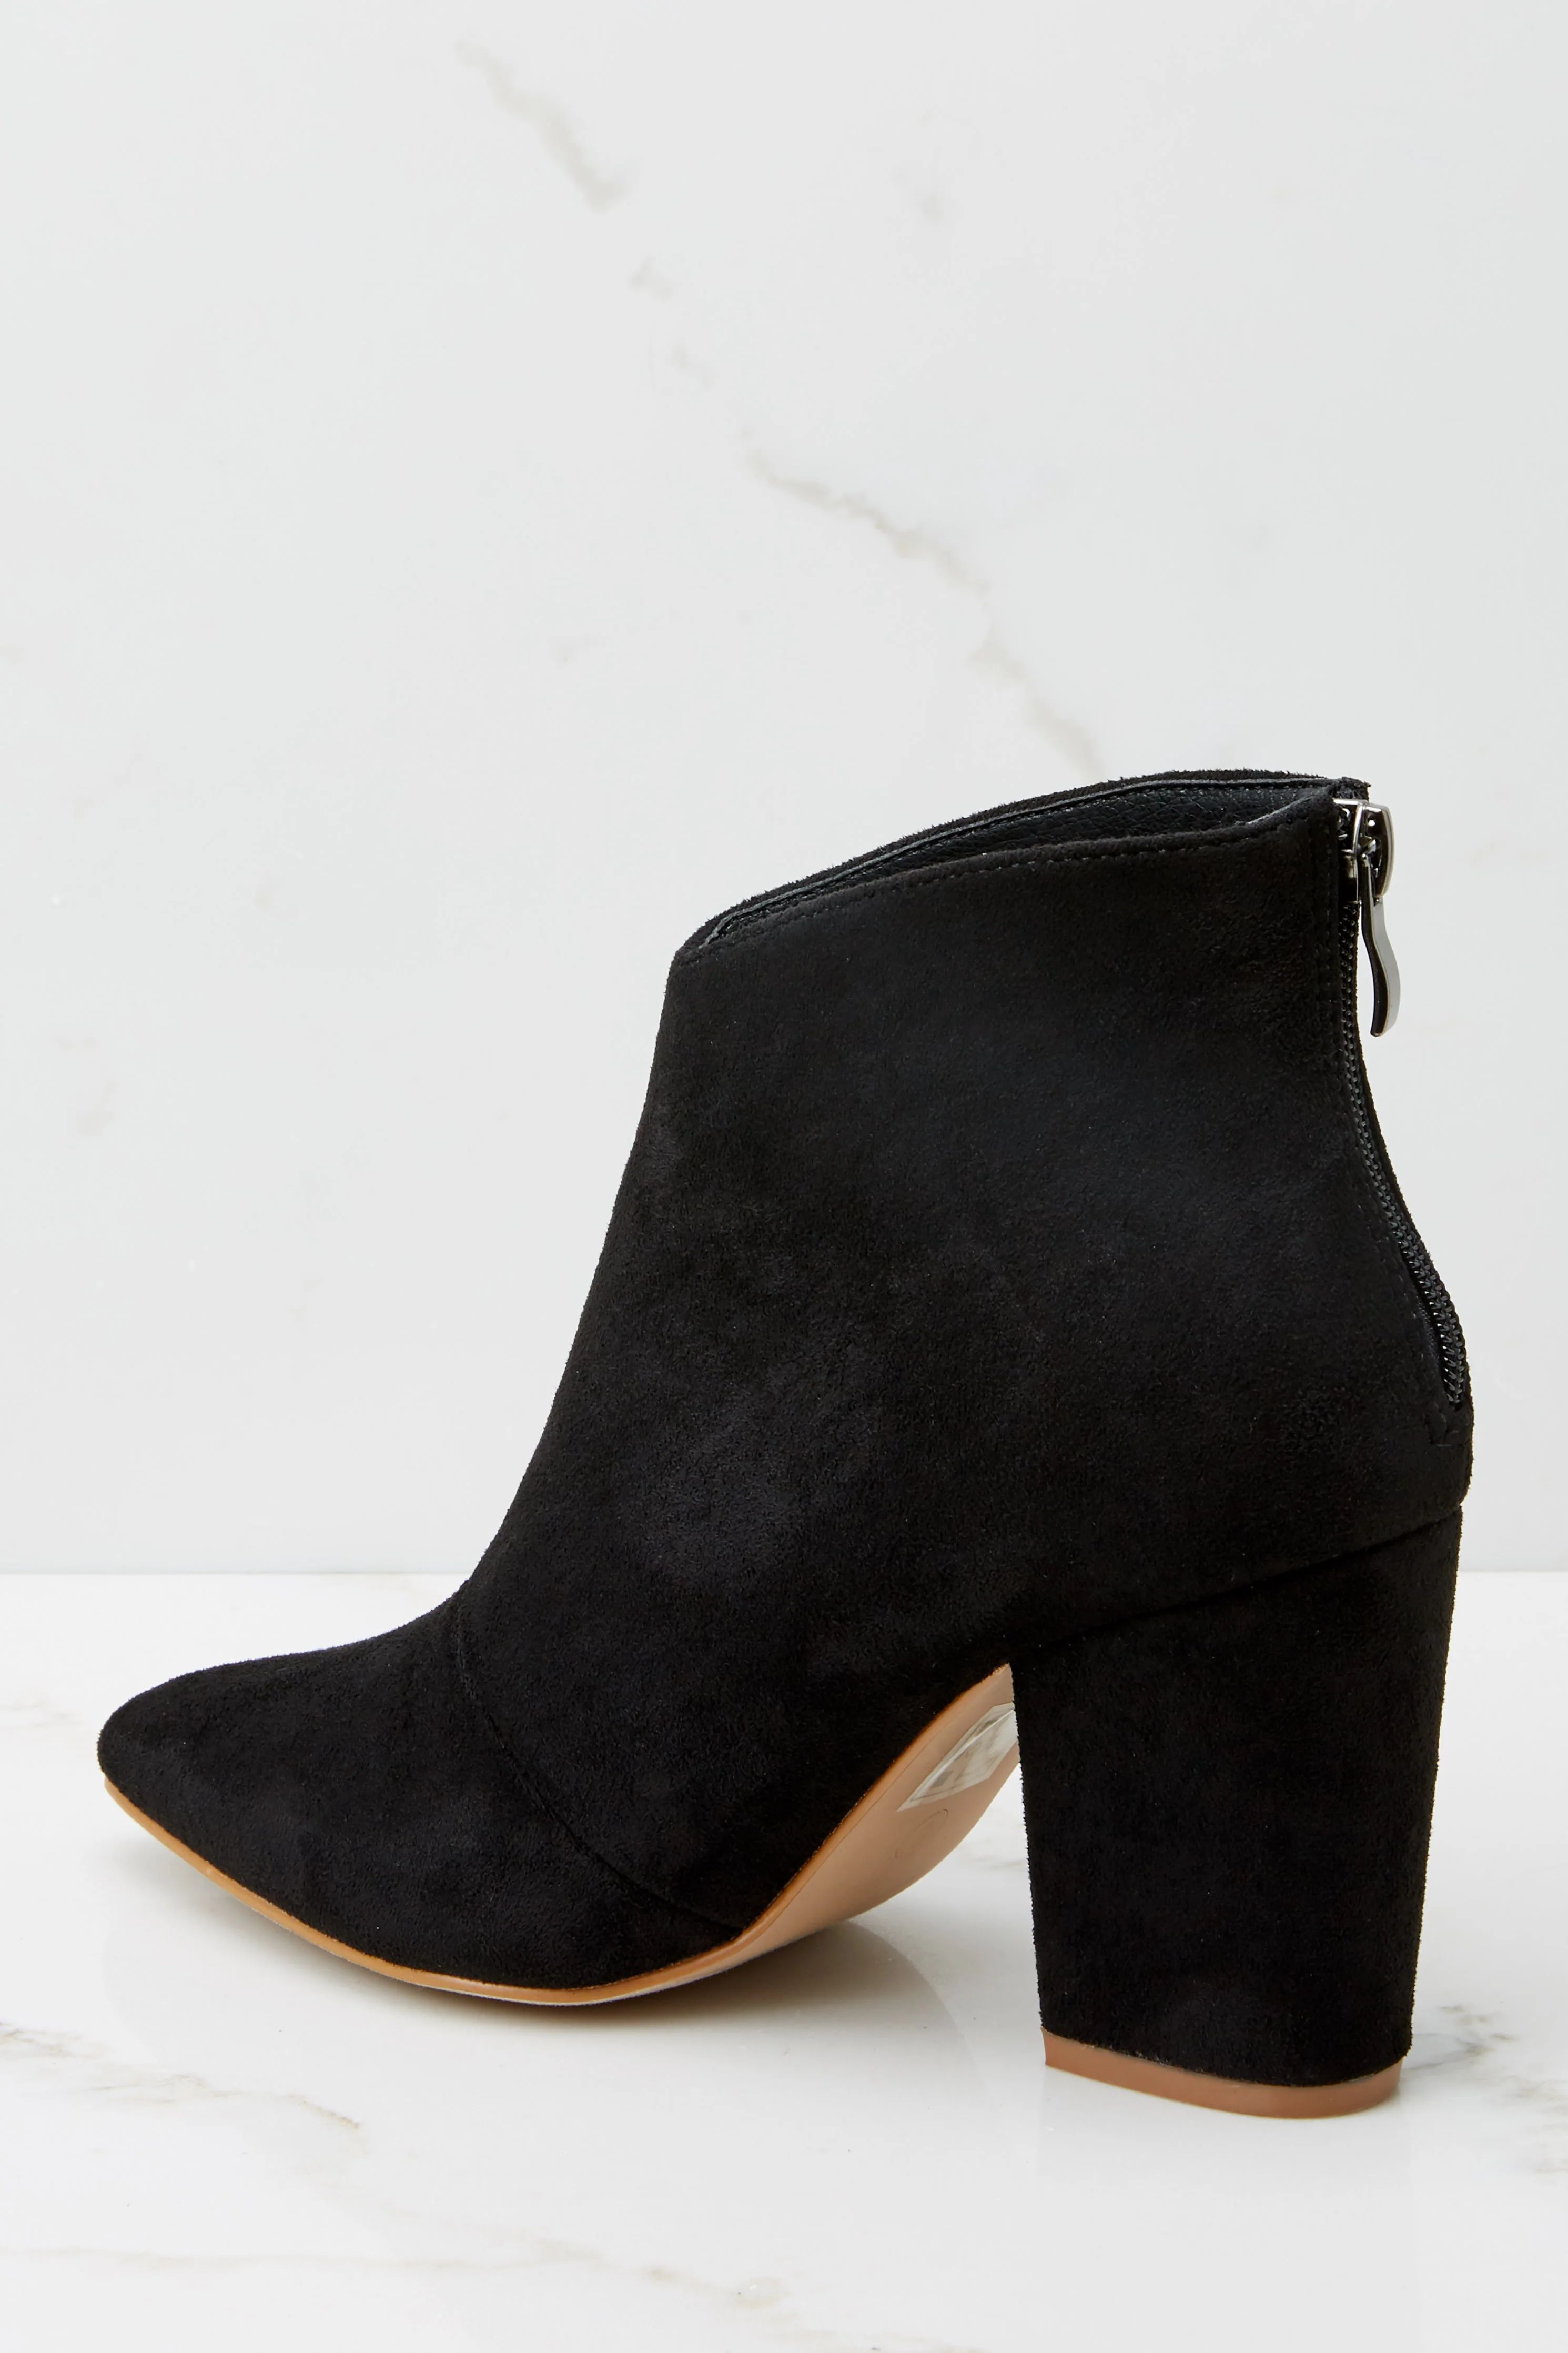 Step Towards You Black Ankle Booties | Red Dress 